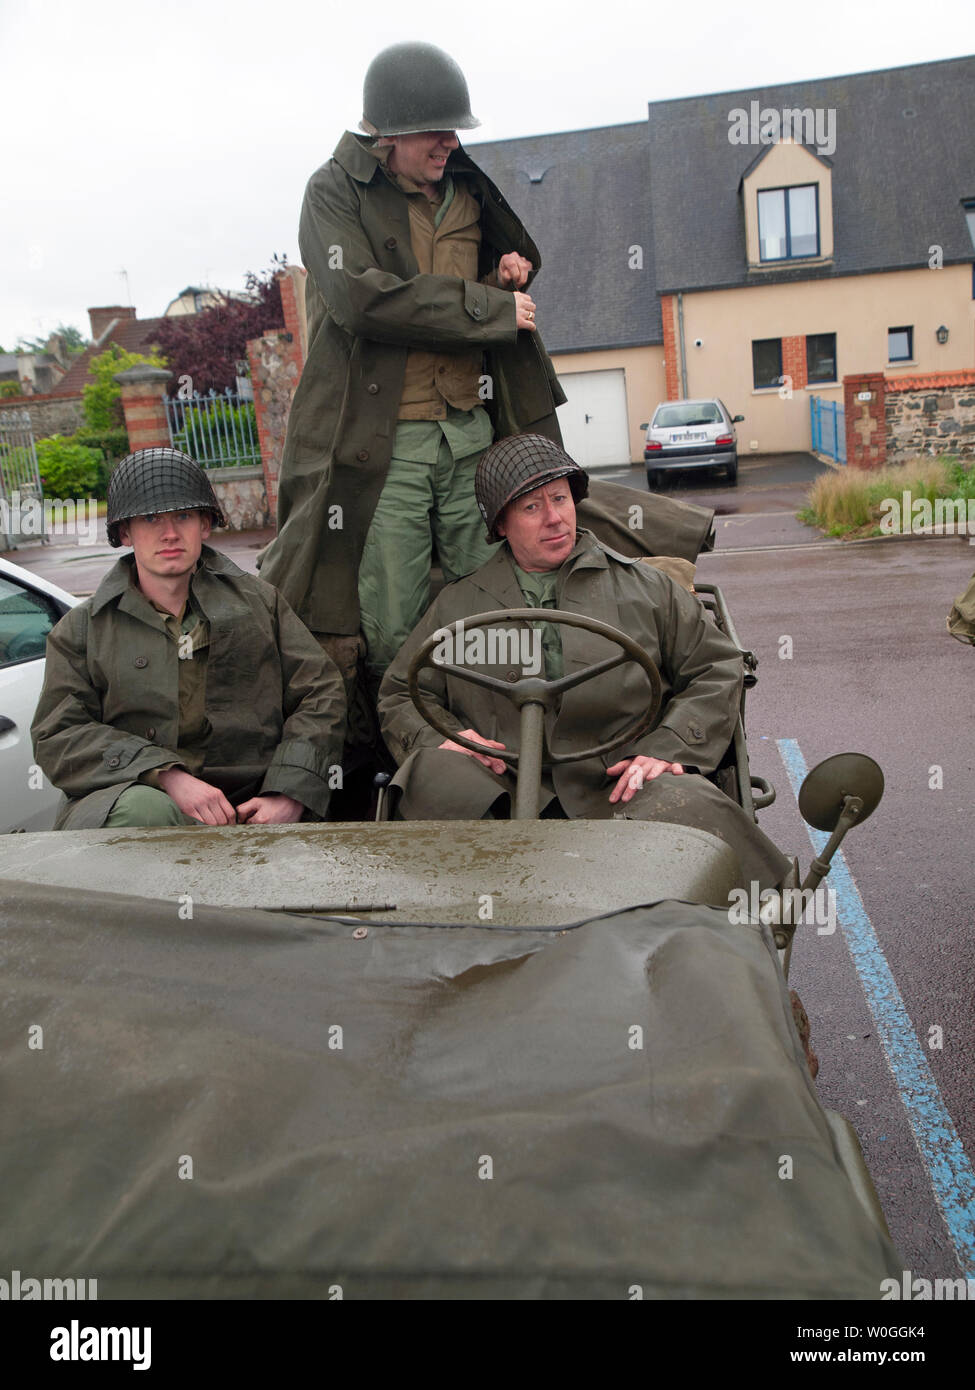 Historical reenactment enthusiasts relive World War II in Normandy Stock Photo